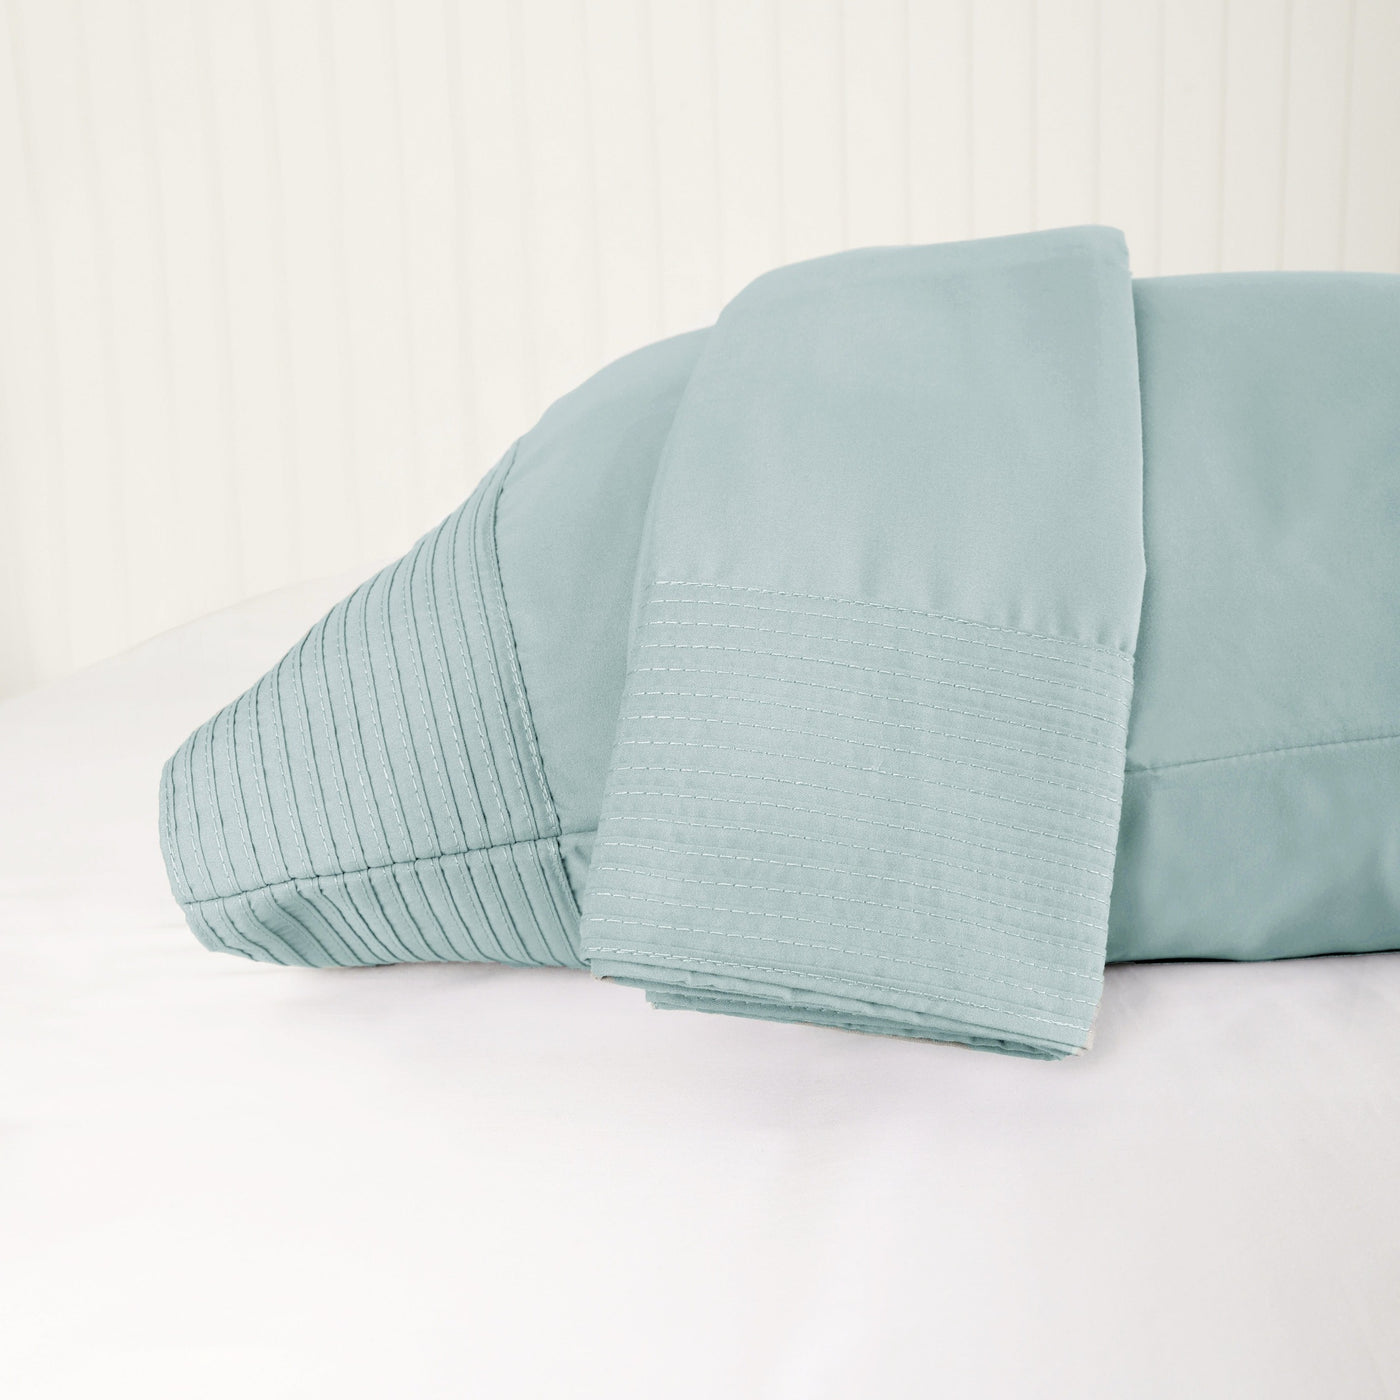 Details and Texture of Vilano Pleated Pillow Cases in Sky Blue#color_vilano-sky-blue